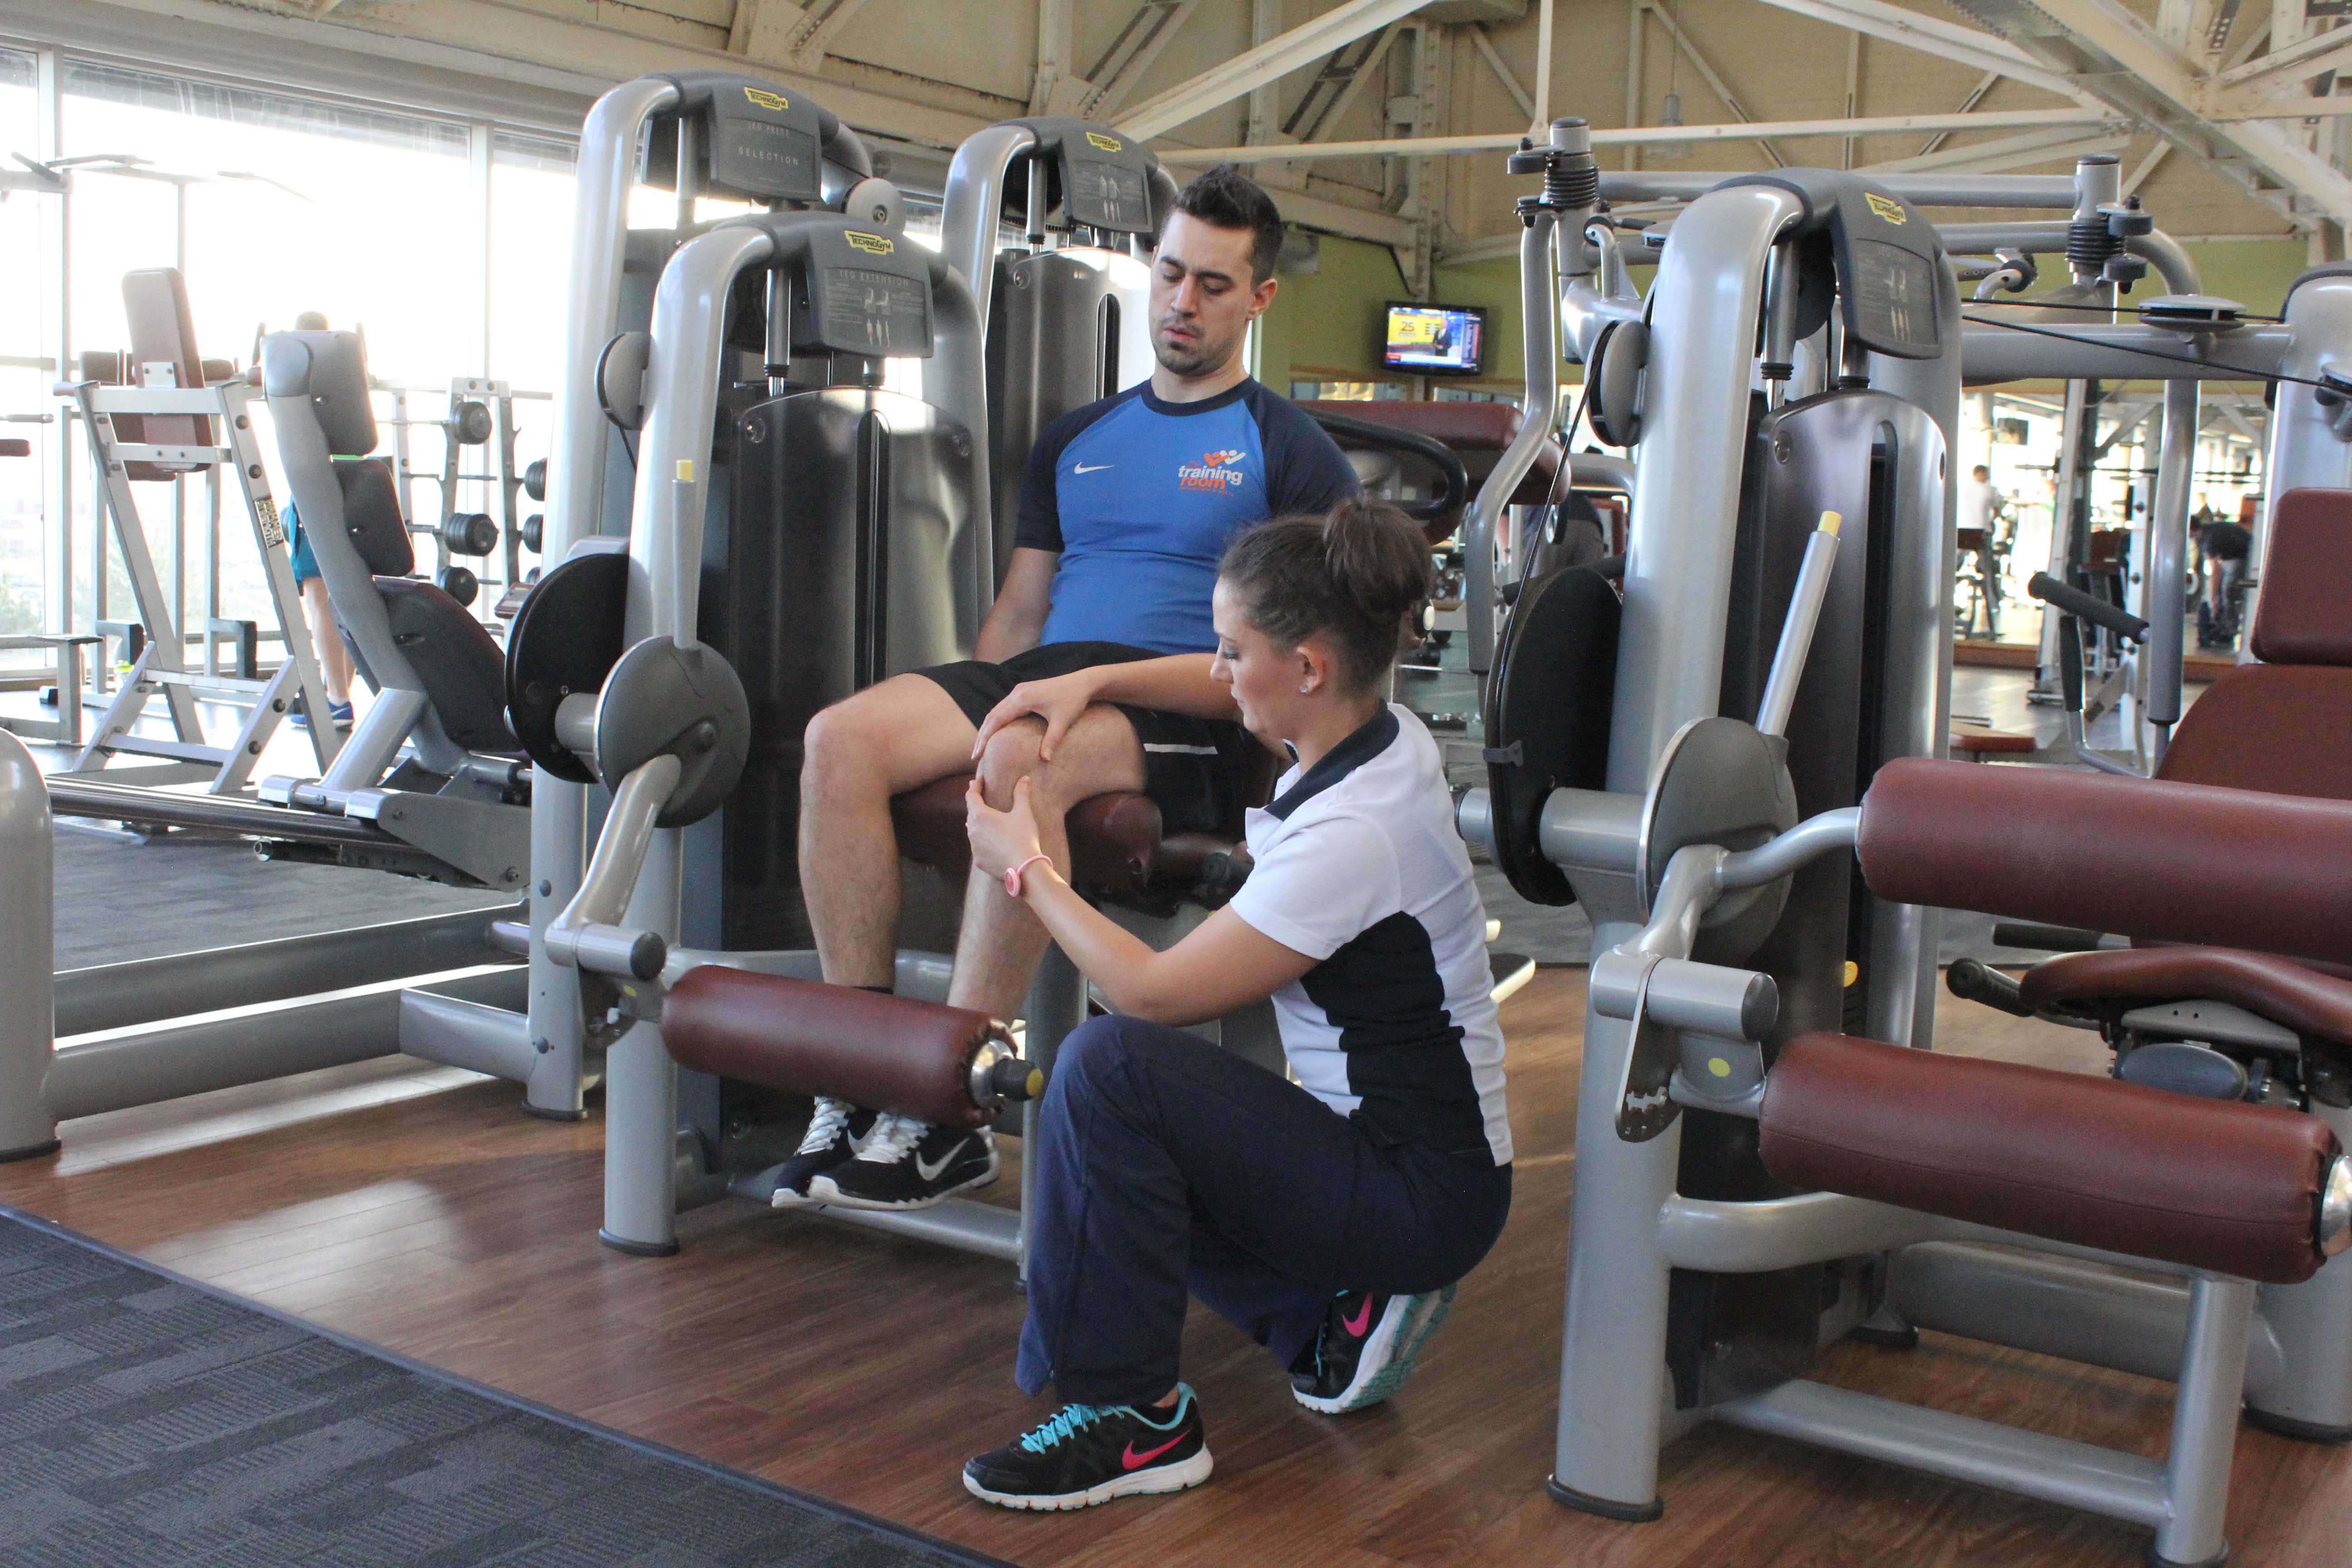 Progressive knee strengthening exercises performed under supervision of experienced MSK physiotherapist